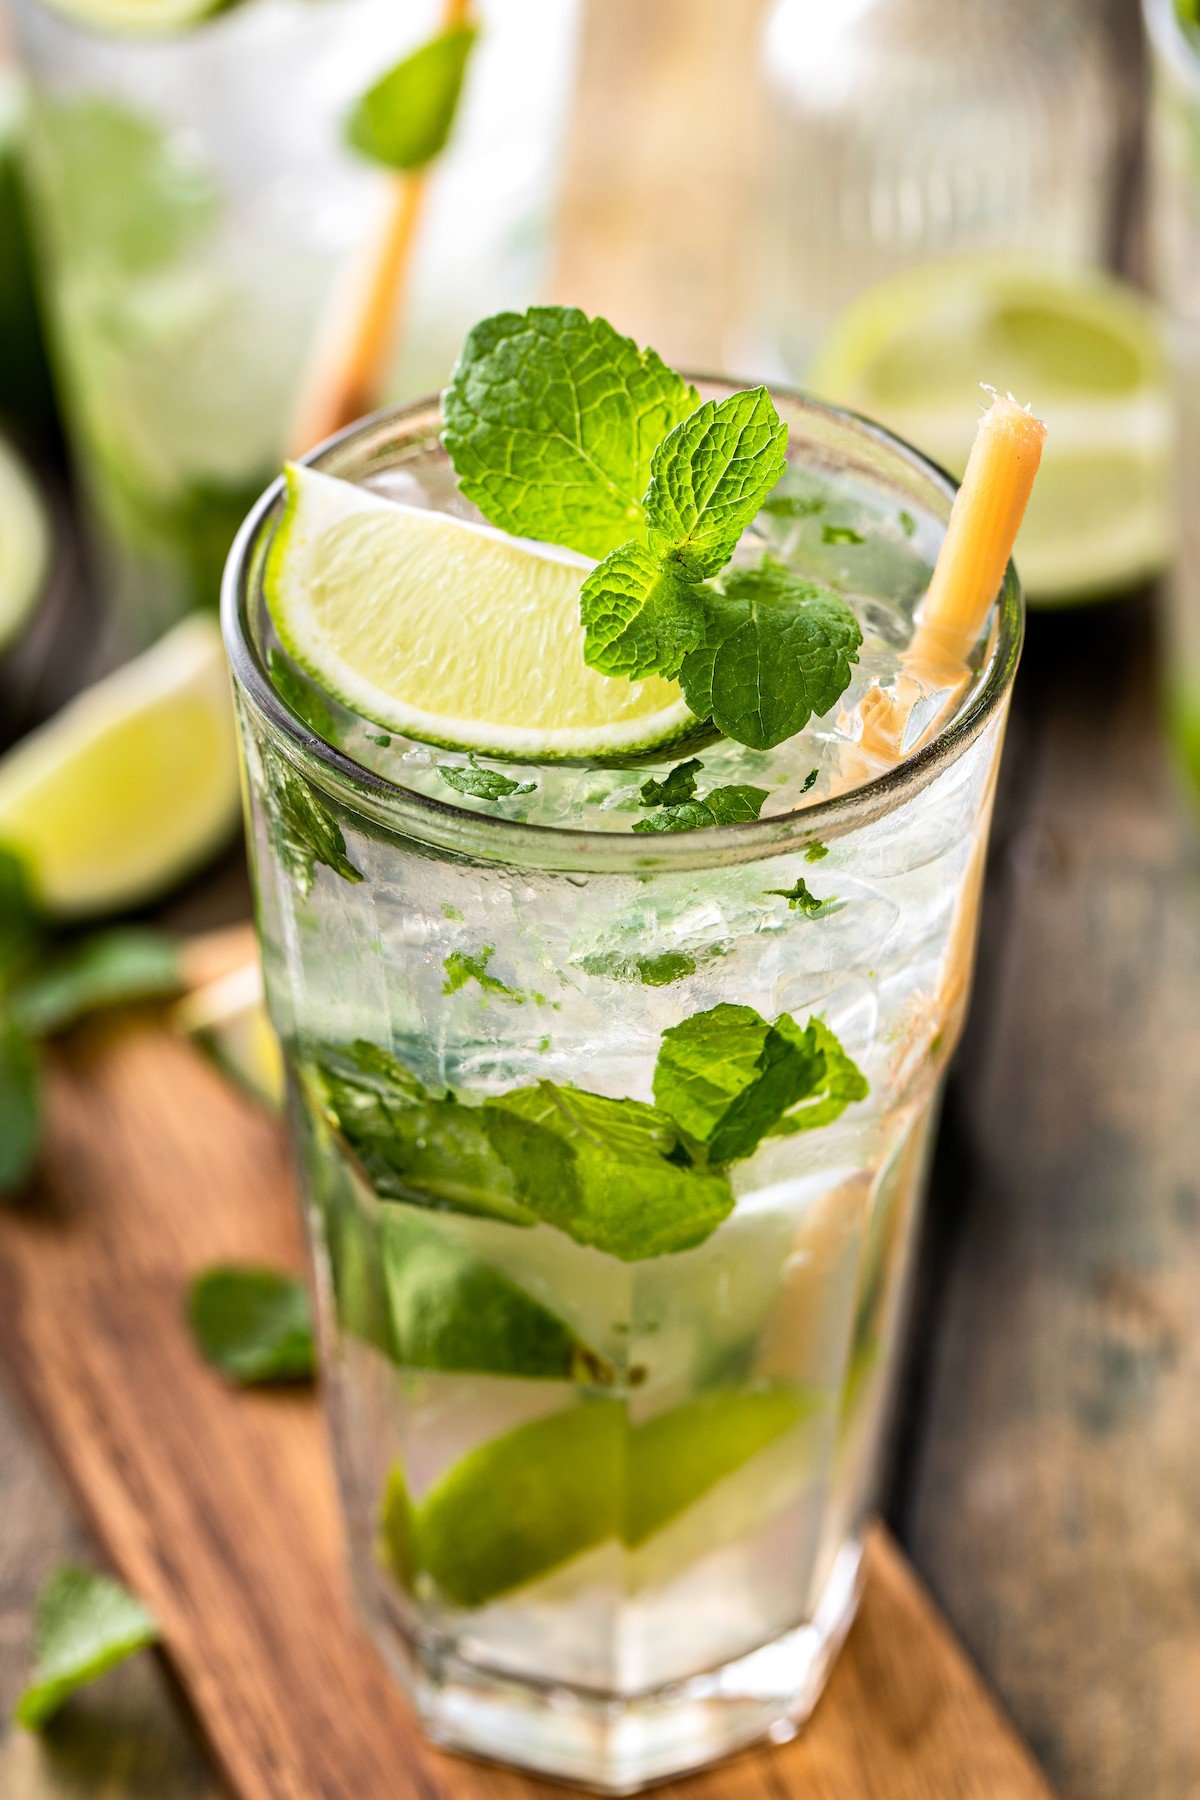 Rum mixed with simple syrup, fresh mint leaves, and lime wedges.